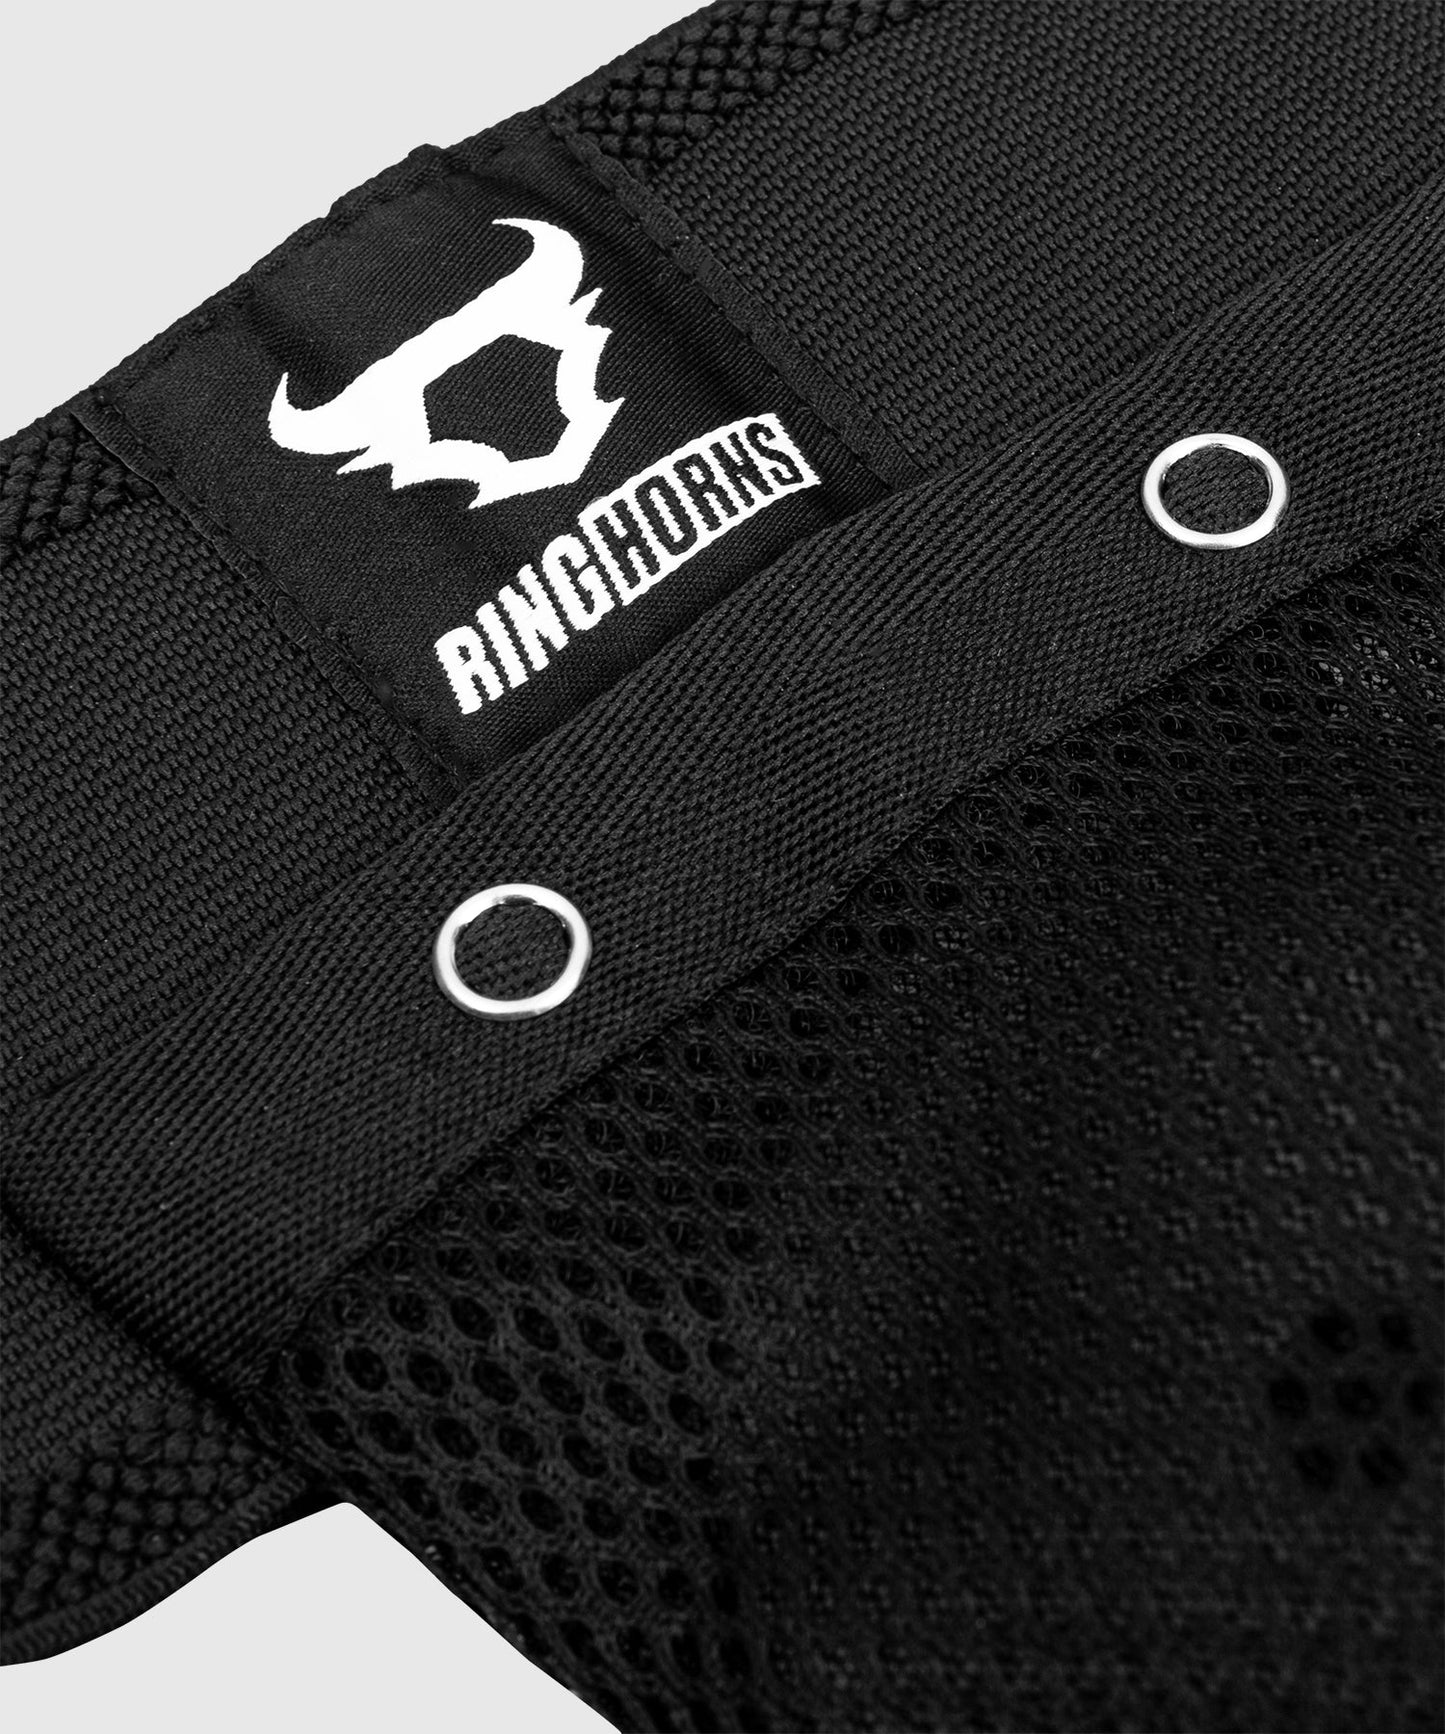 Ringhorns Charger Groin Guard & Support - Black